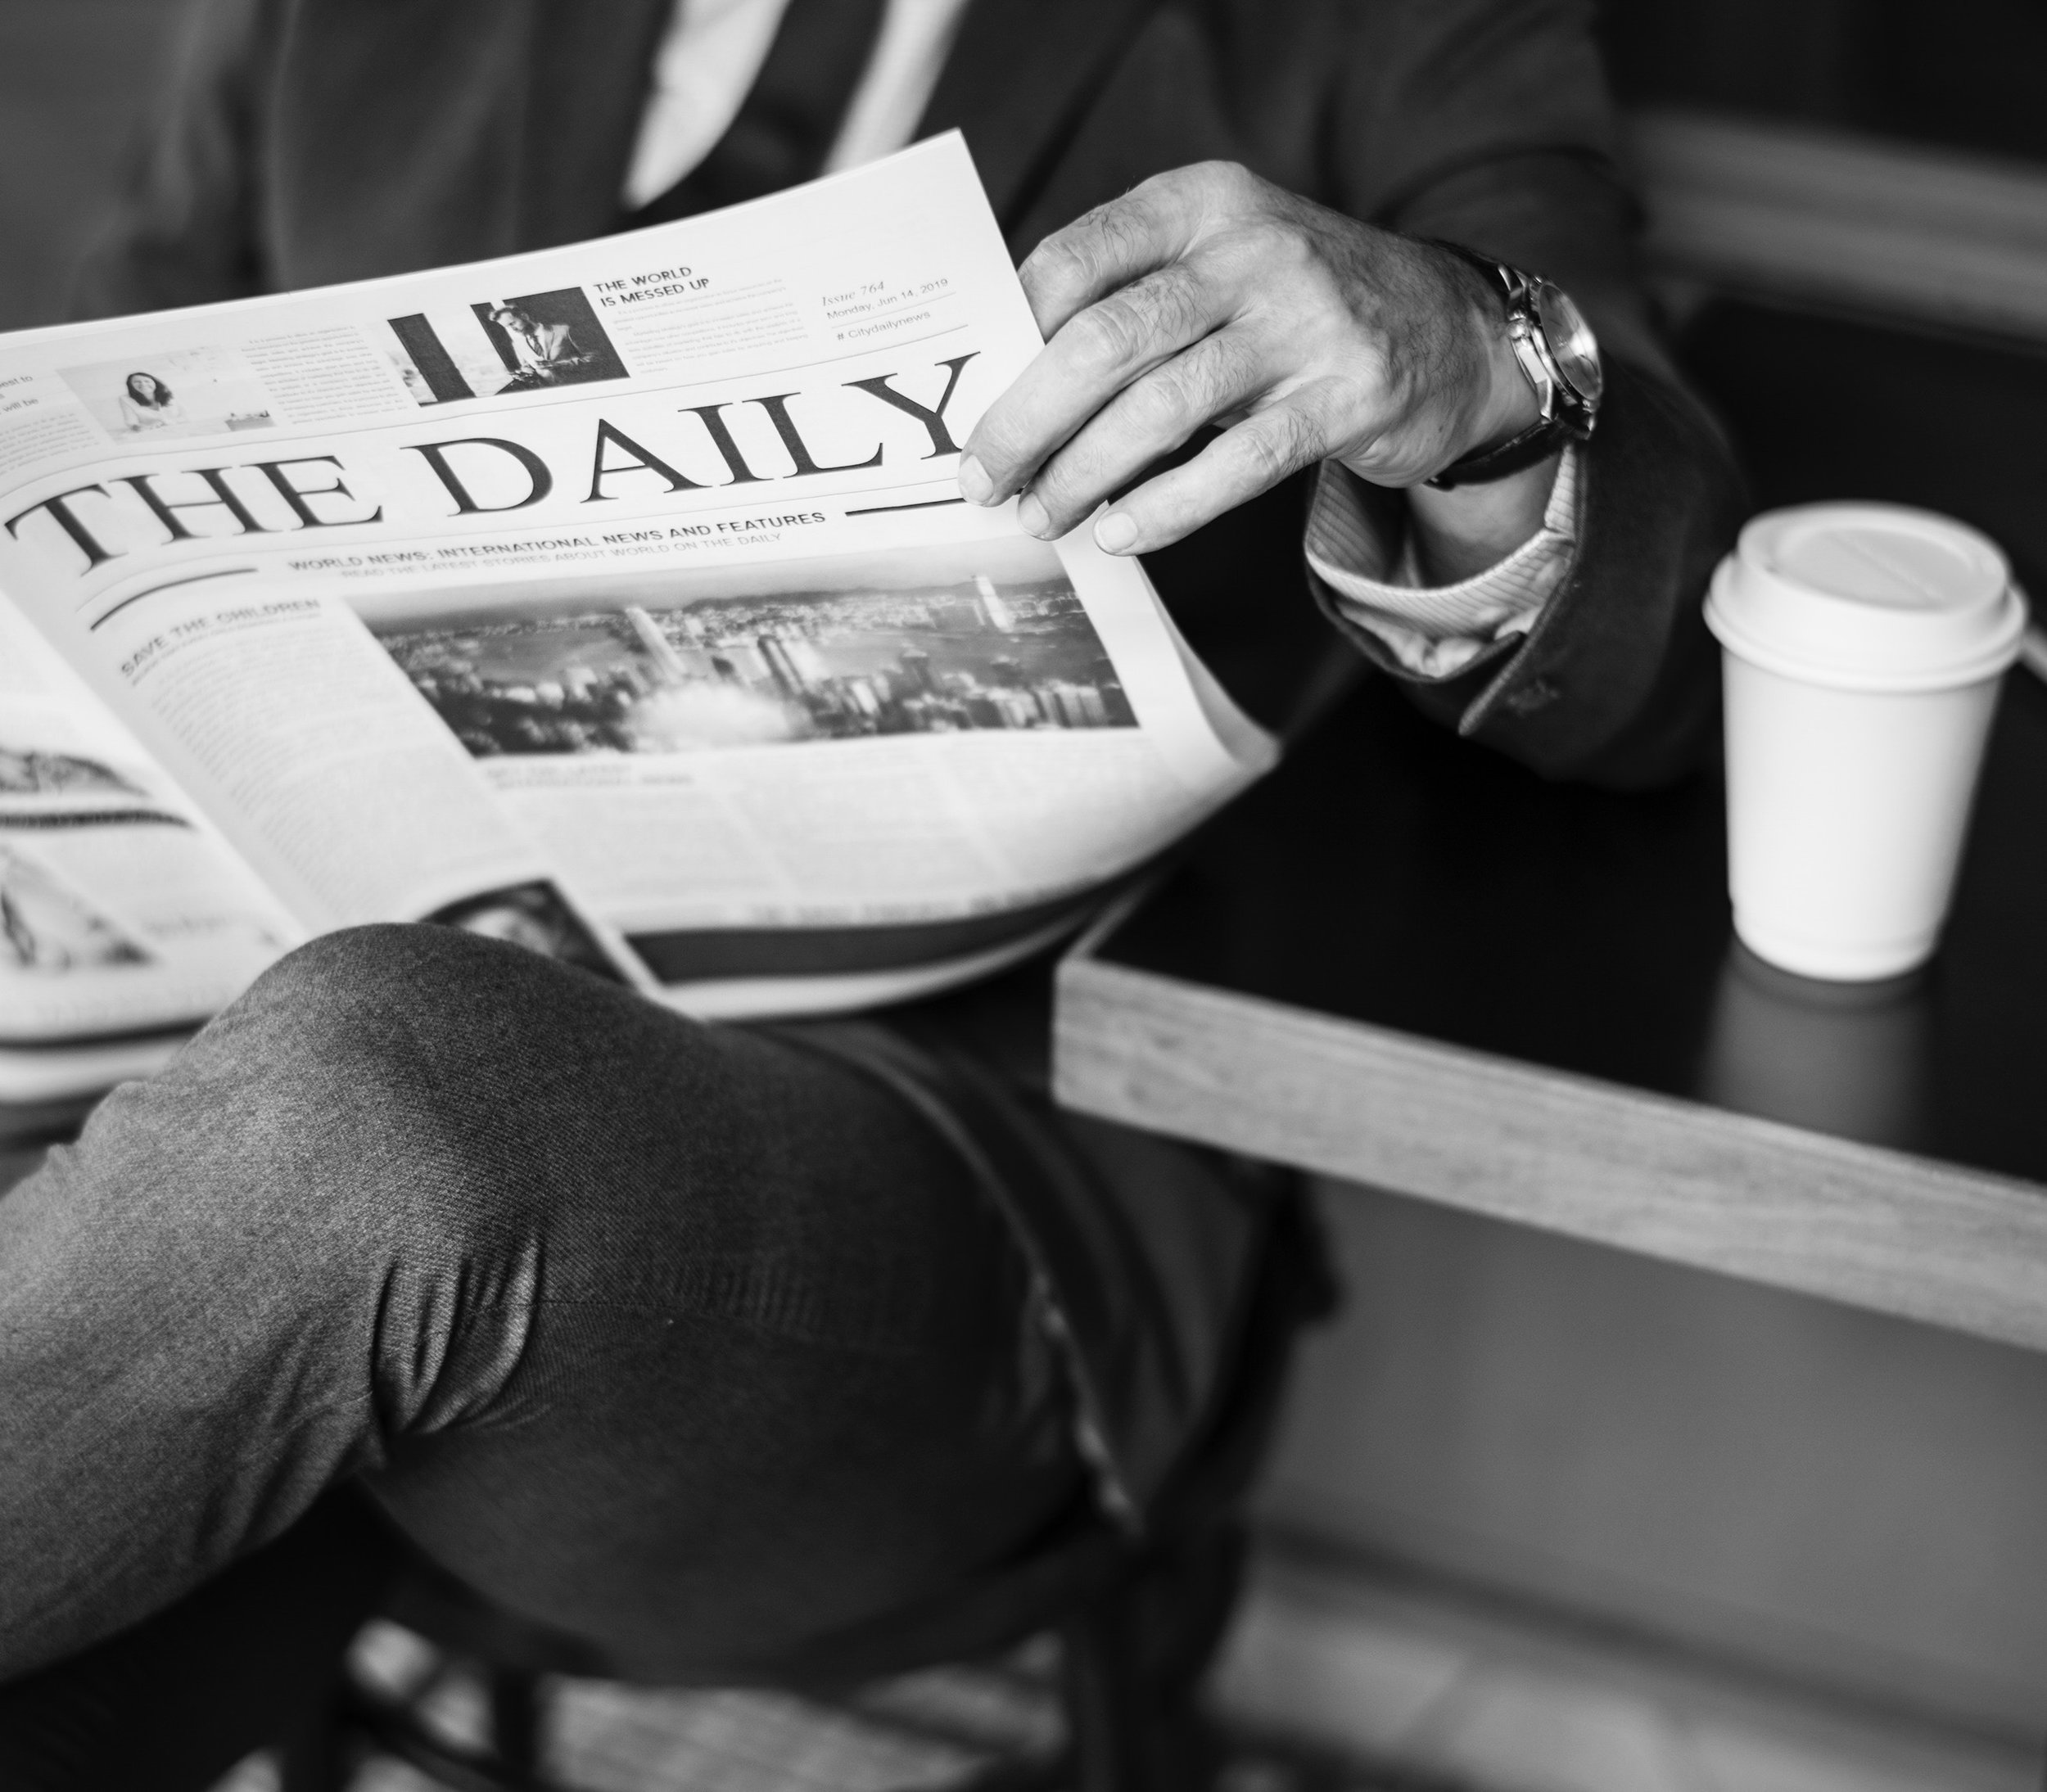 Person reading a newspaper on a bench, with a coffee cup on the table beside them